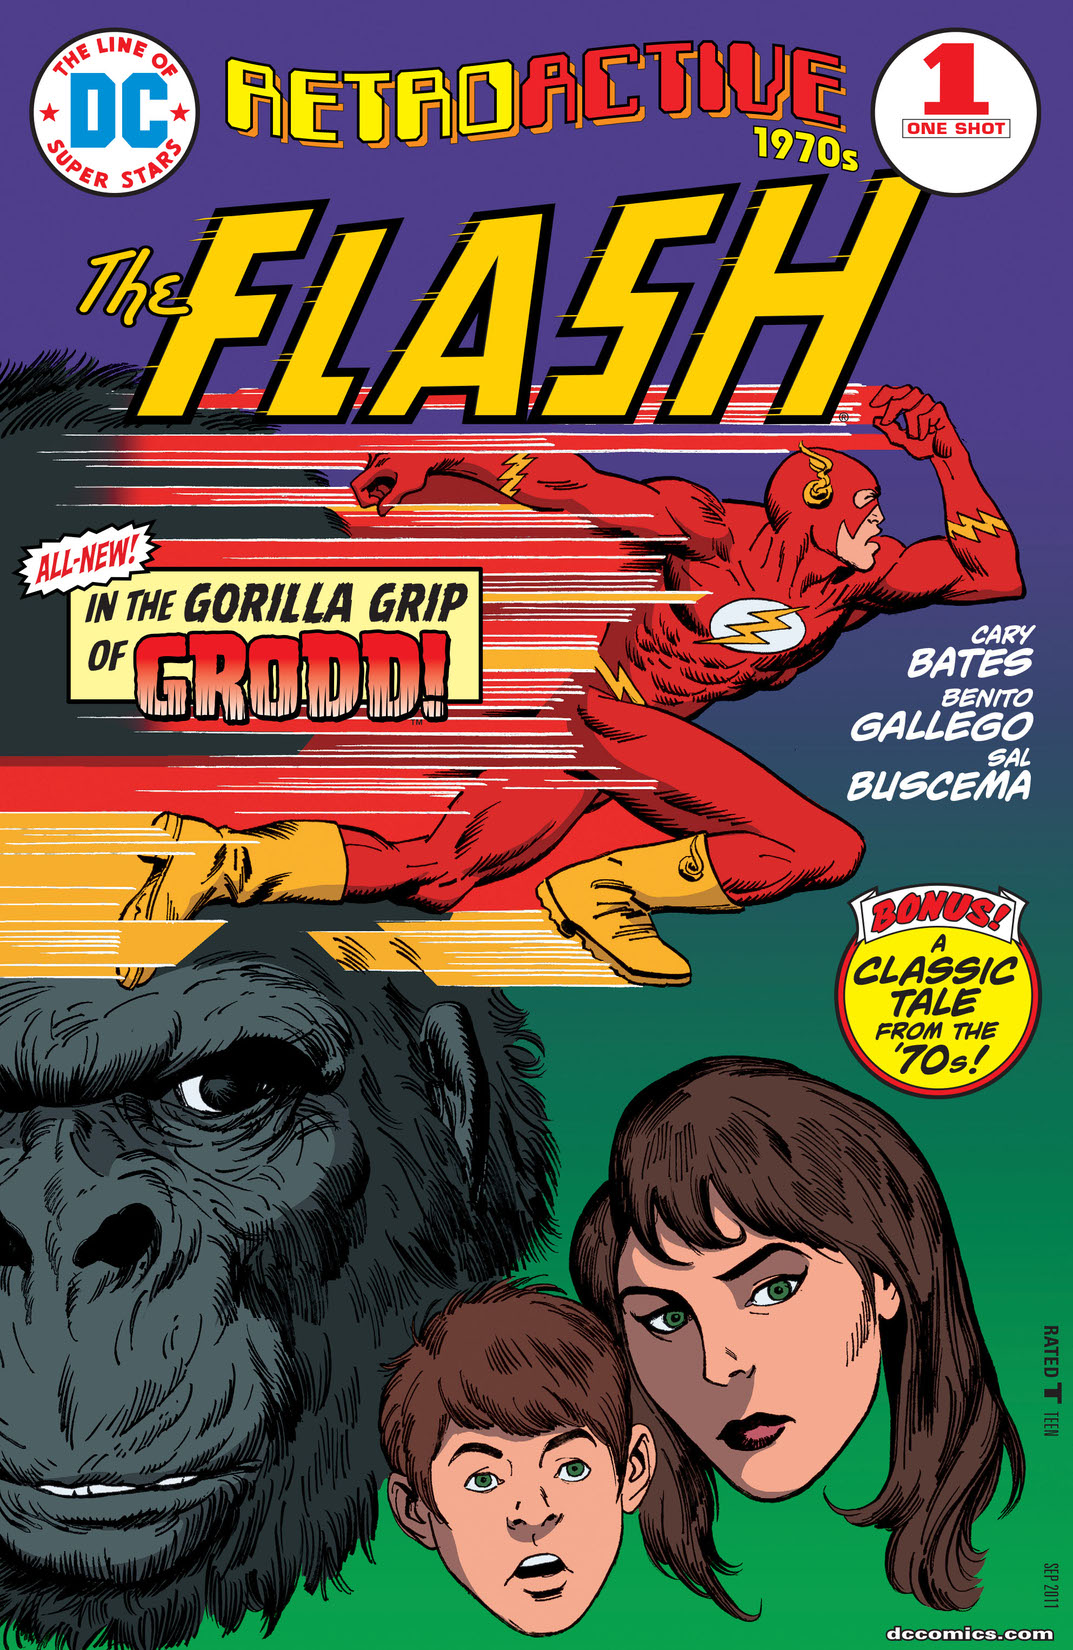 DC Retroactive: Flash - The '70s #1 preview images